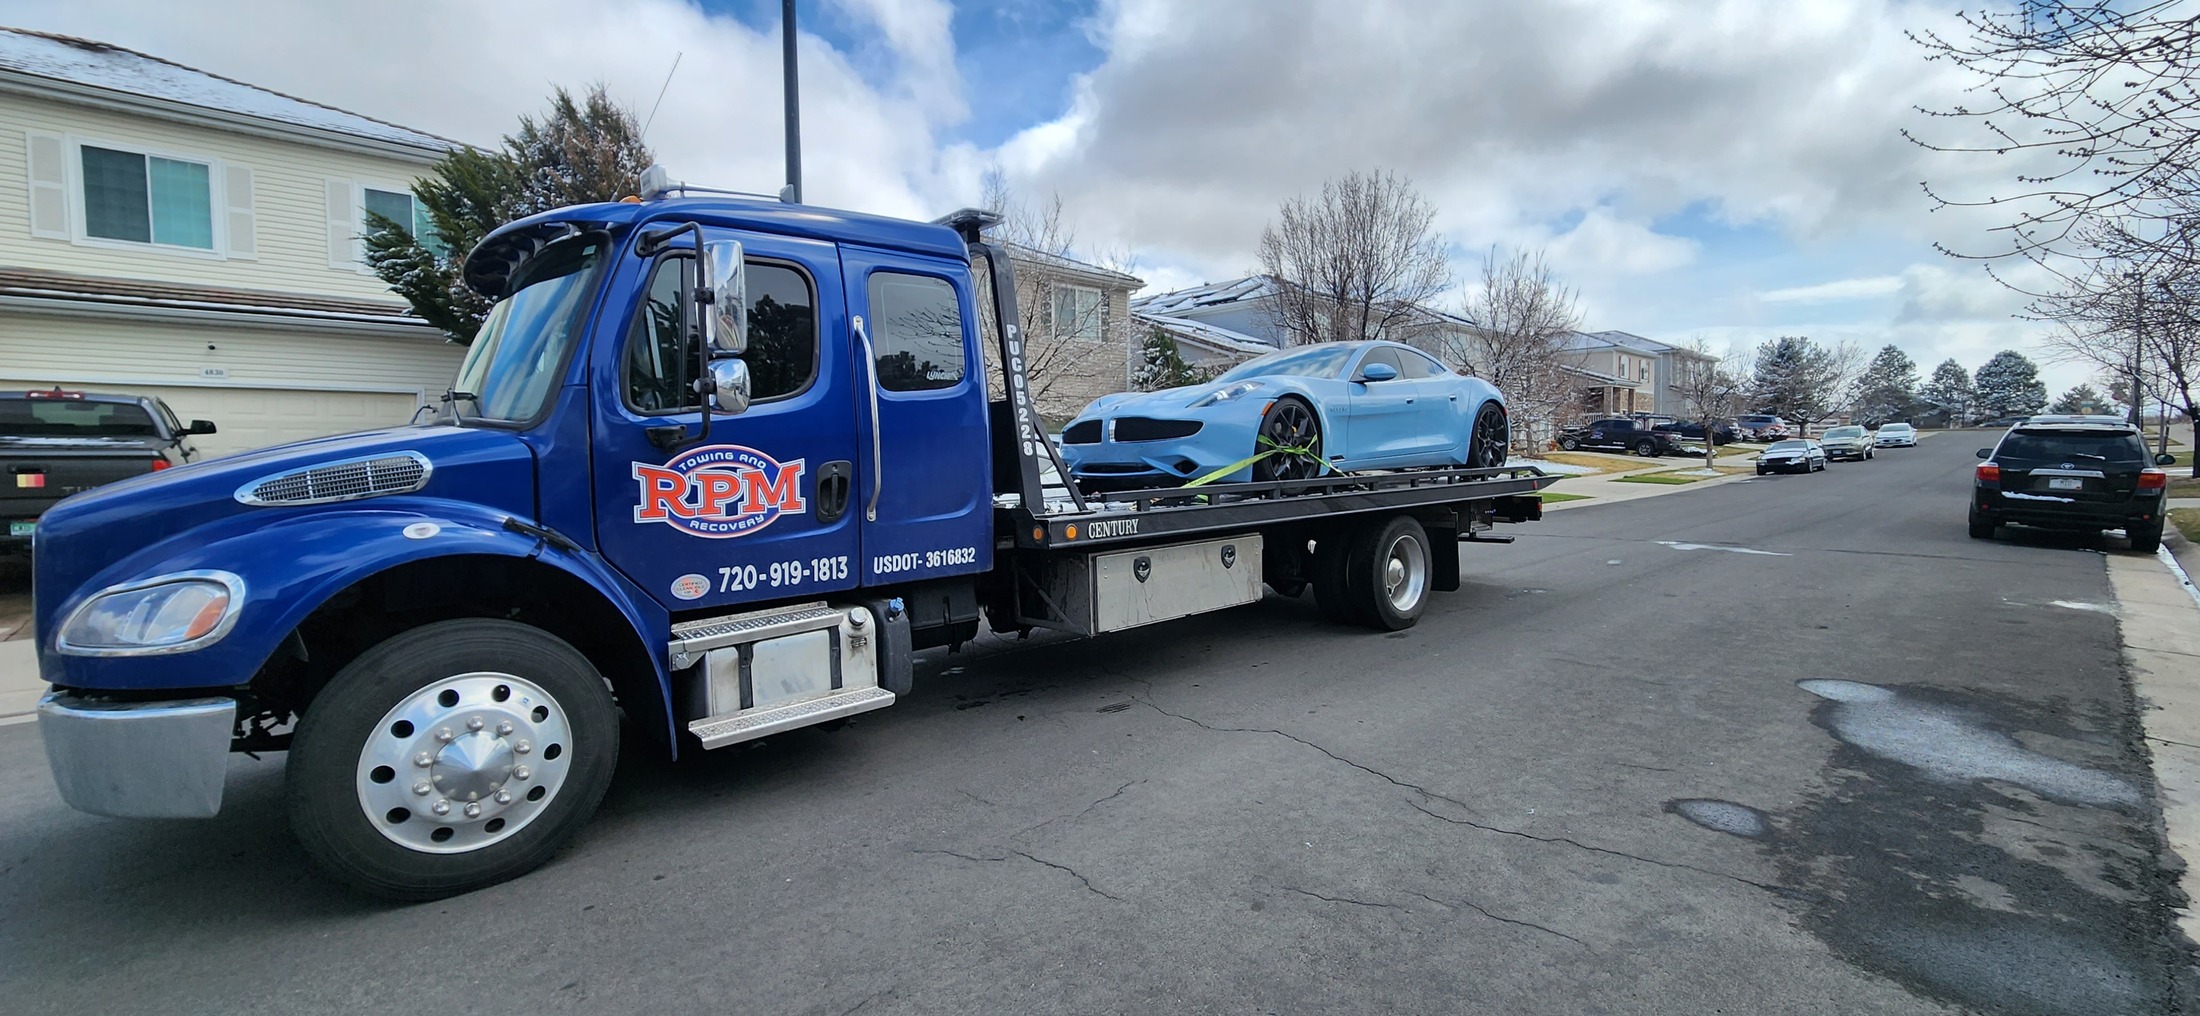 this image shows towing services in Southglenn, CO